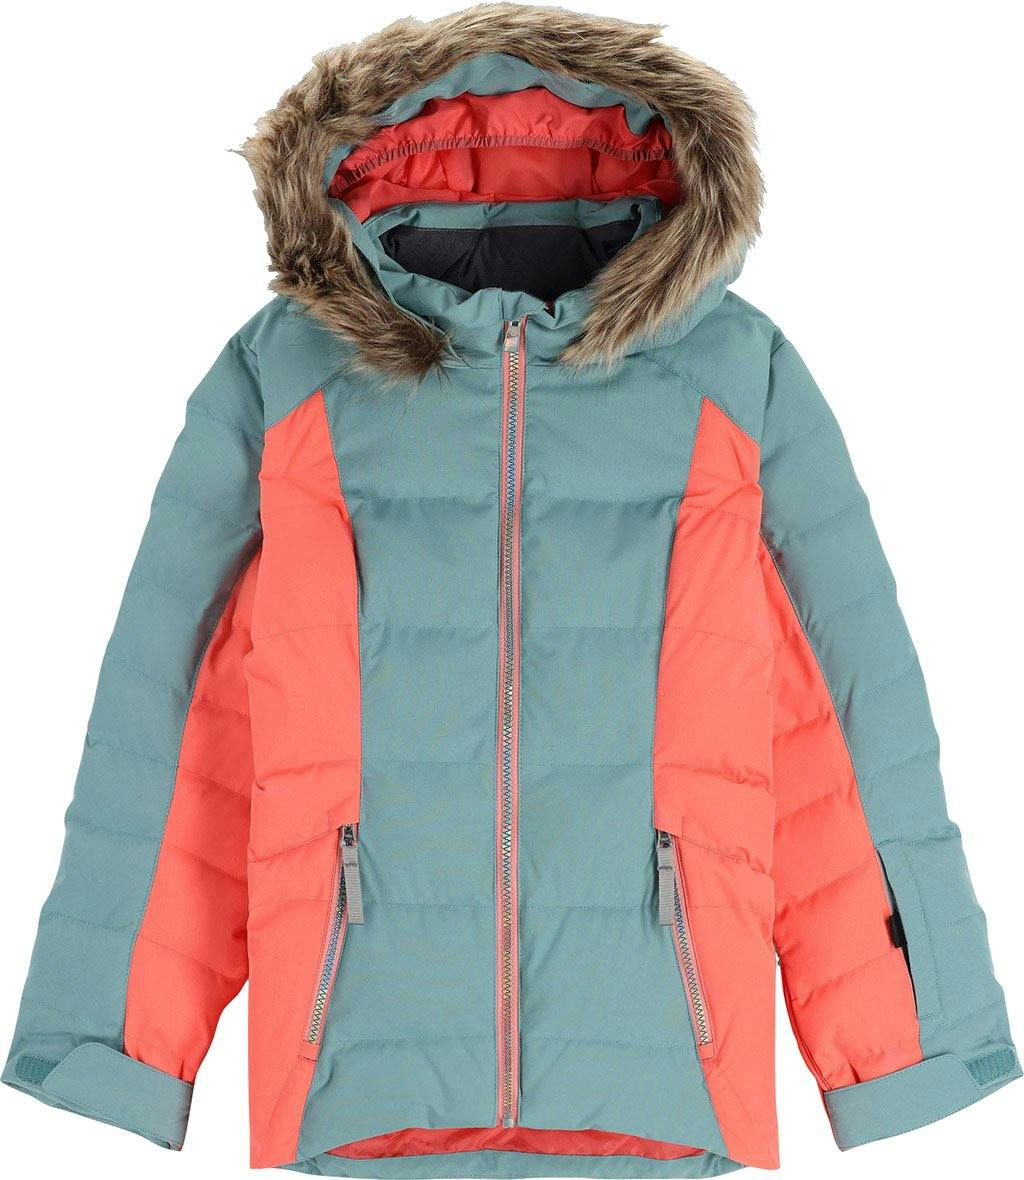 Product image for Atlas Synthetic Jacket - Girl